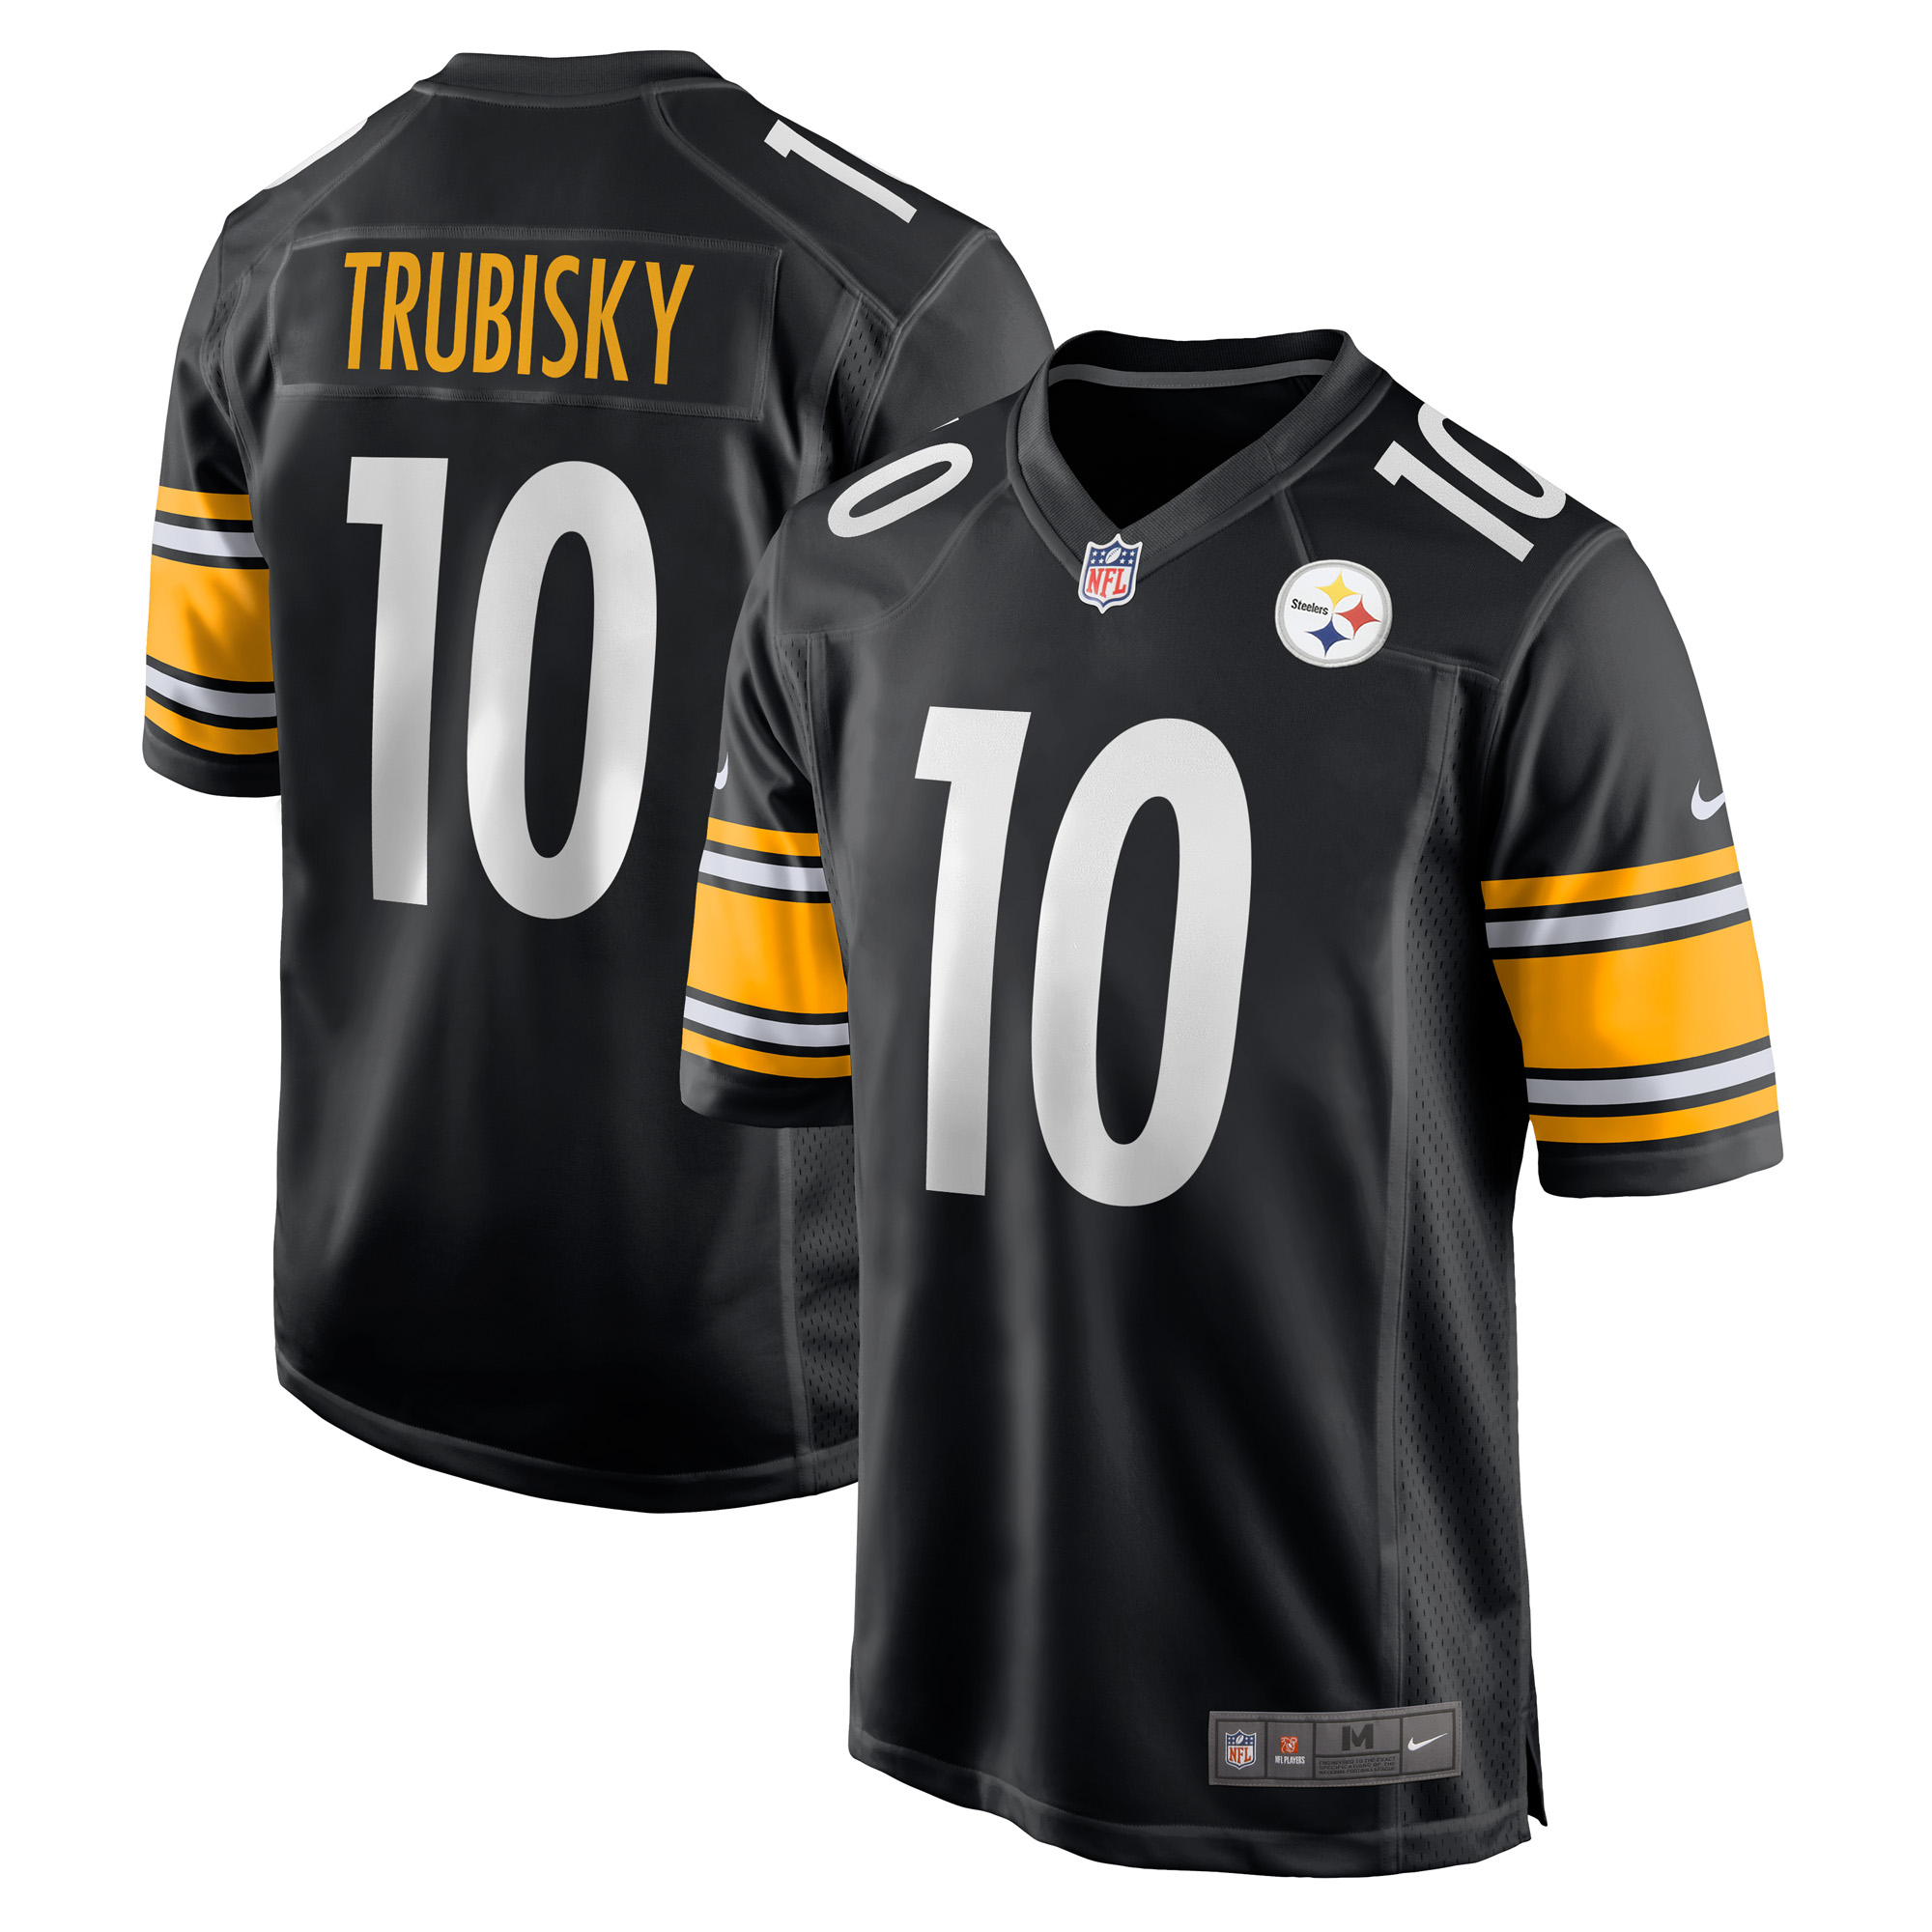 Men's Pittsburgh Steelers #10 Mitchell Trubisky Black Player Game Jersey